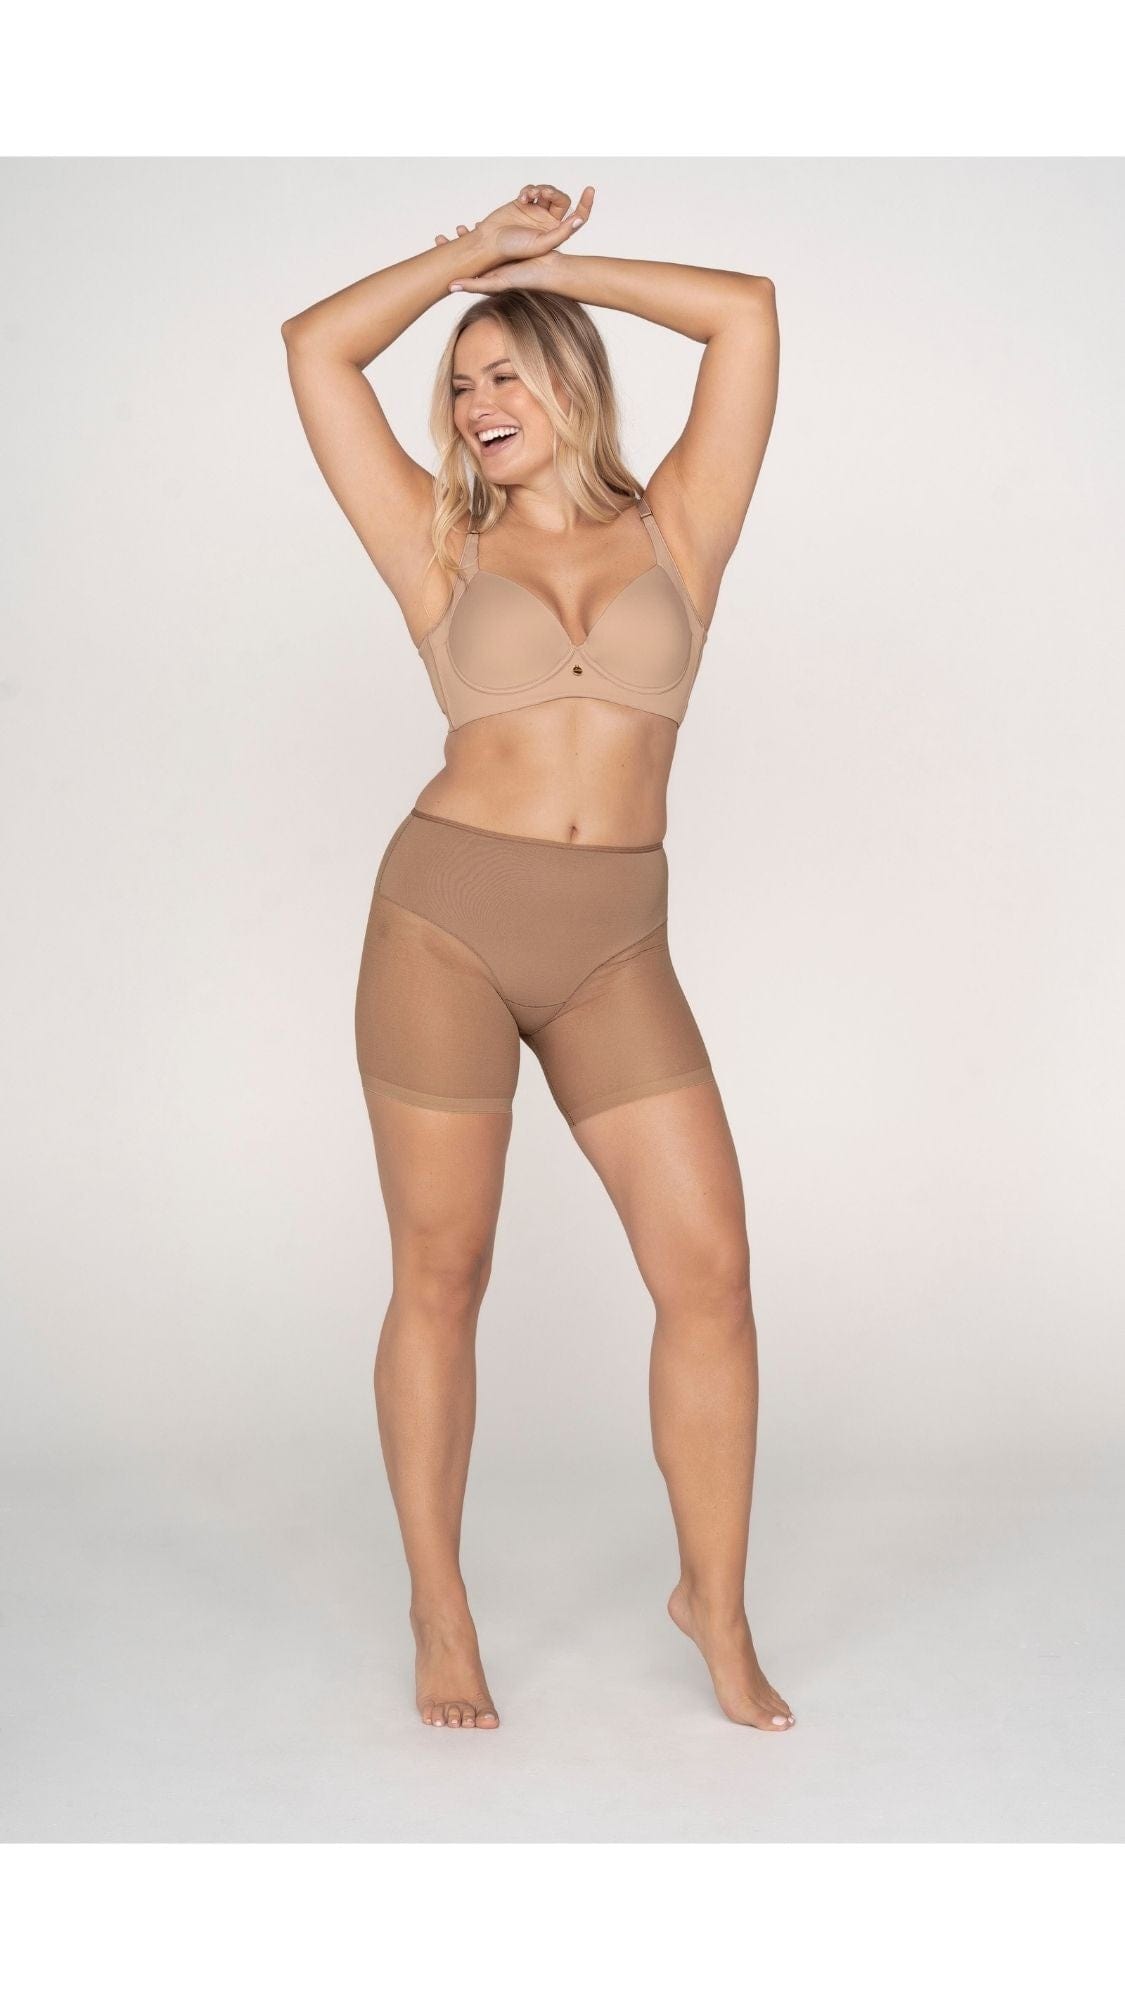 Truly Undetectable Sheer Shaper Short - Natural